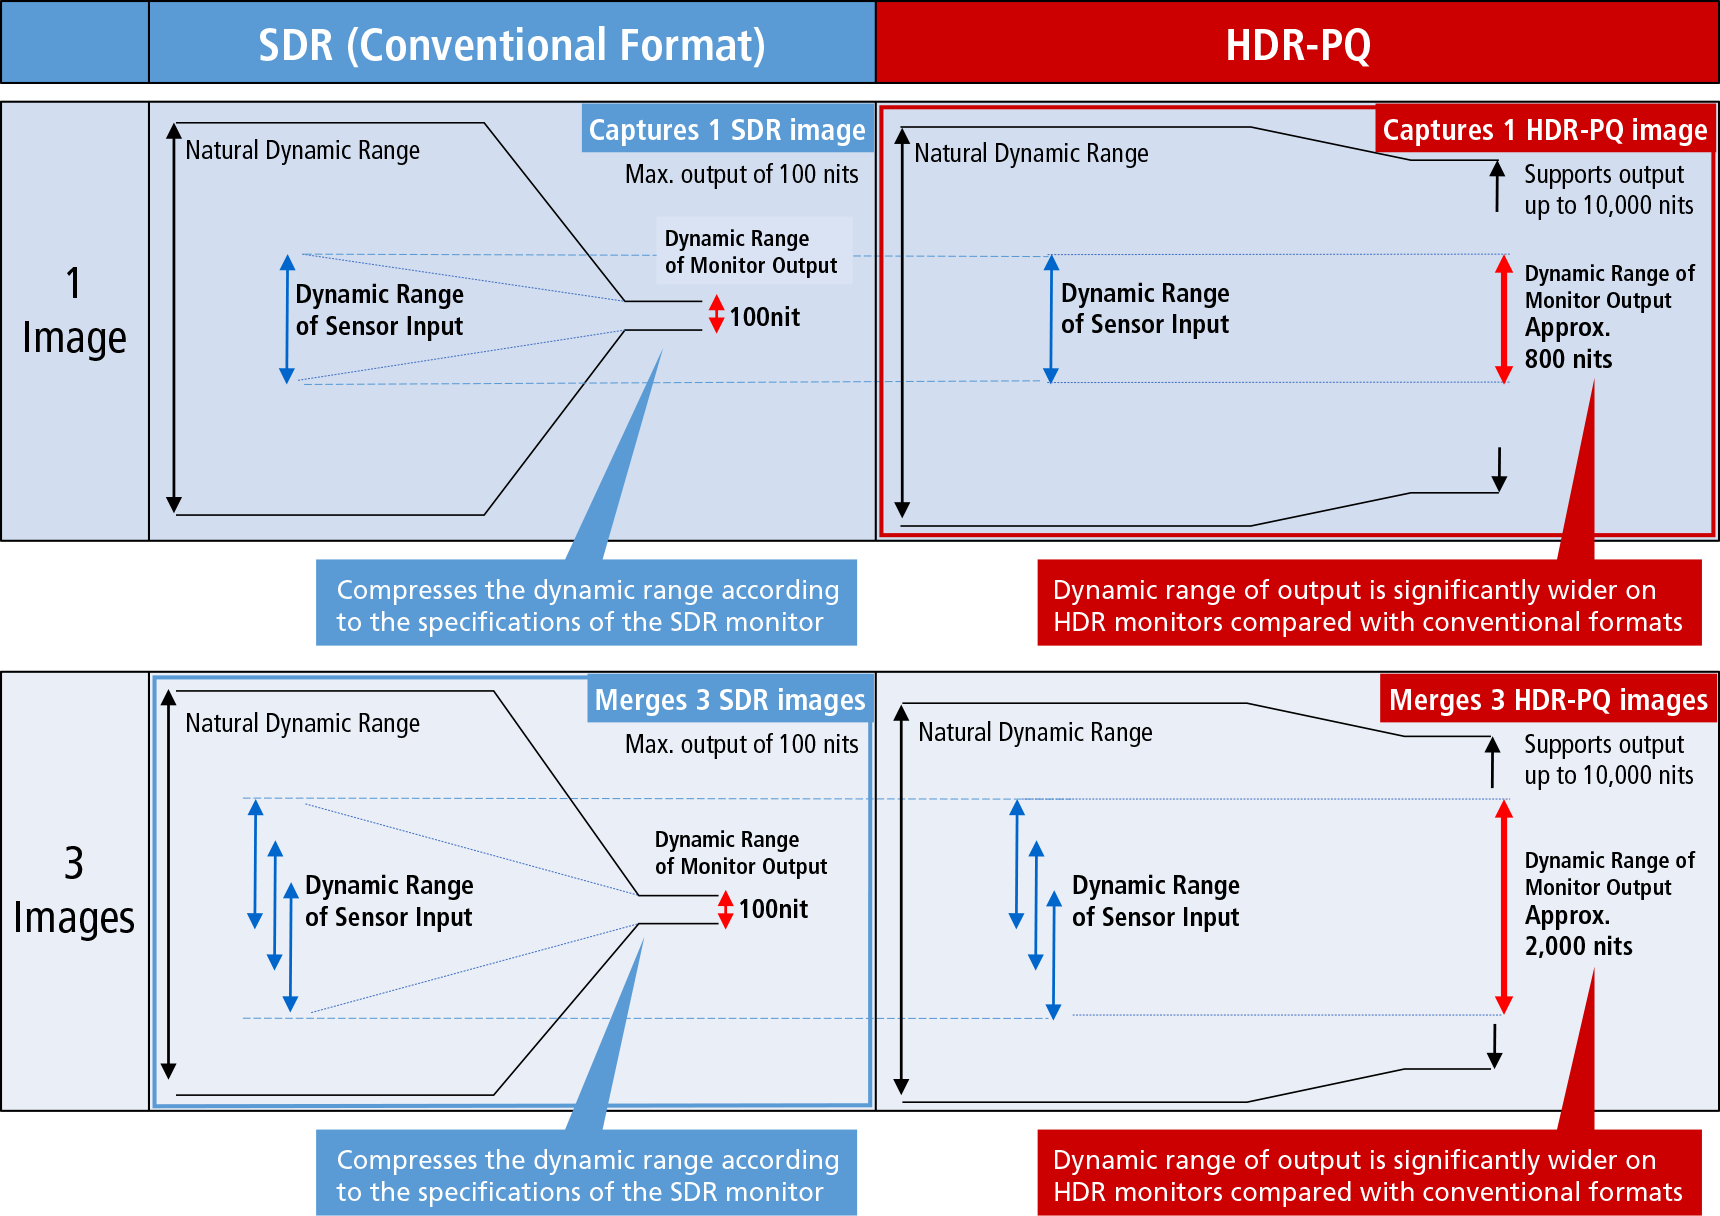 Comparison of SDR and HDR-PQ